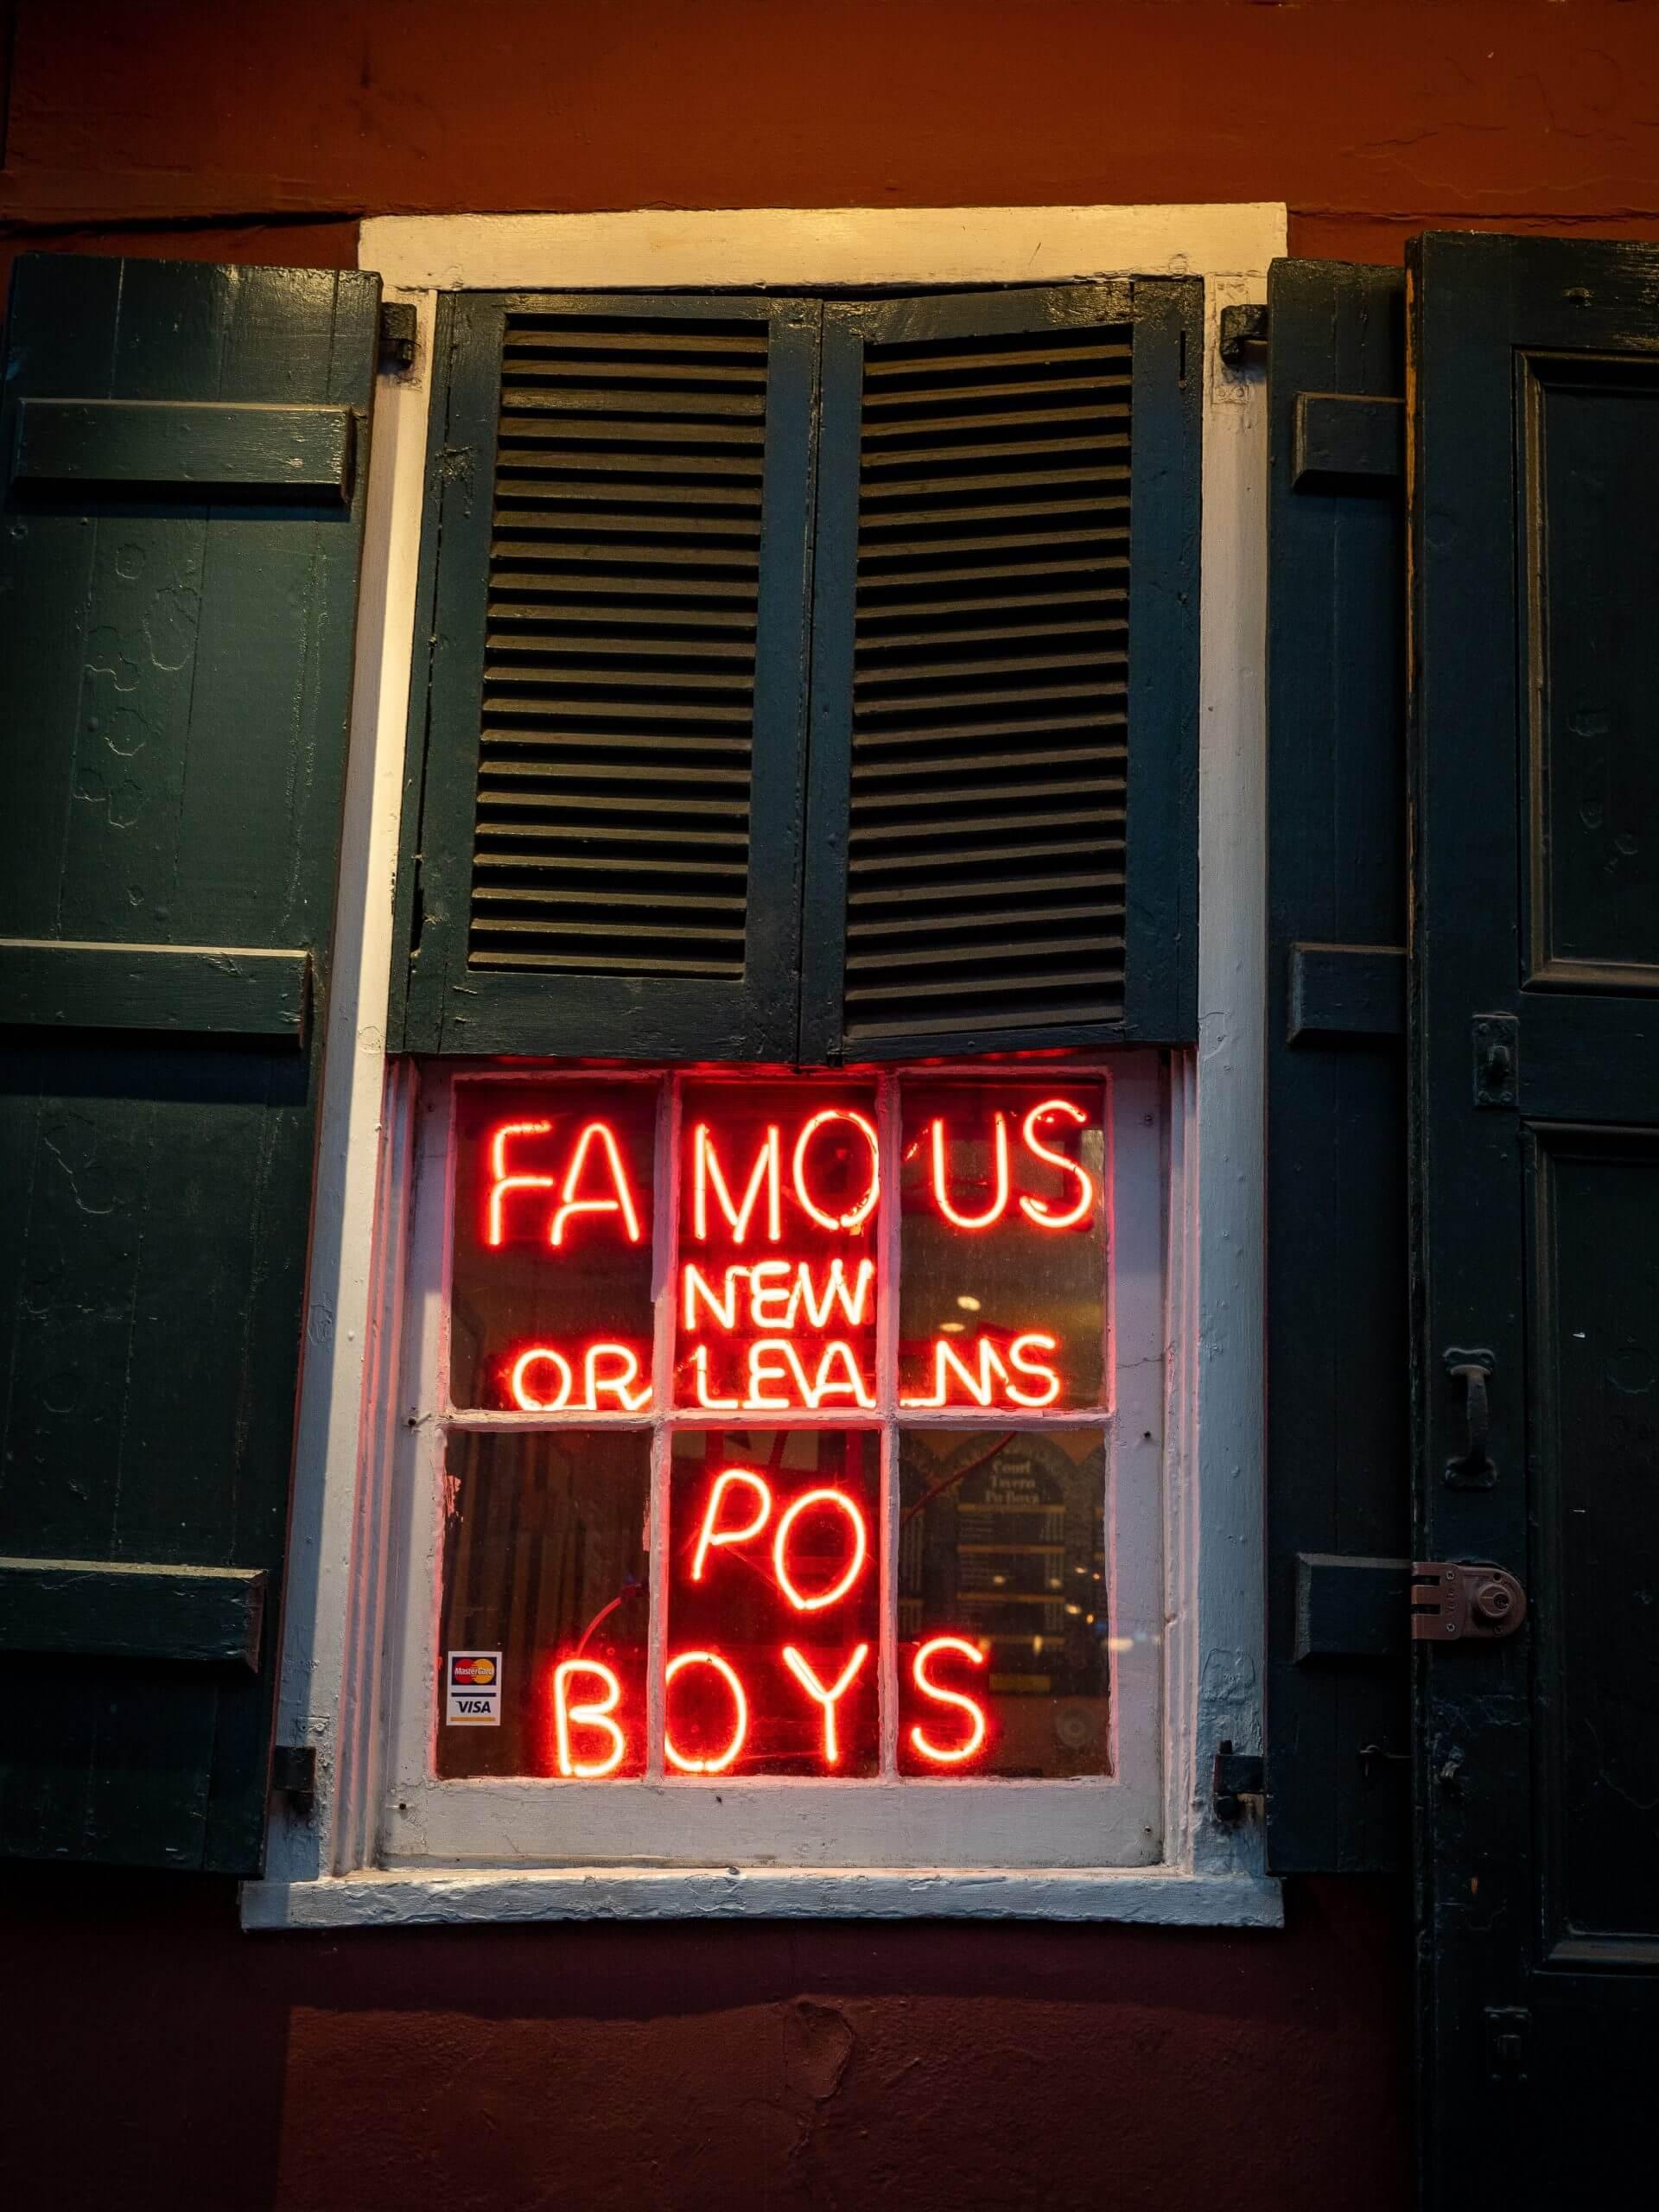 Neon sign boasting about po-boys